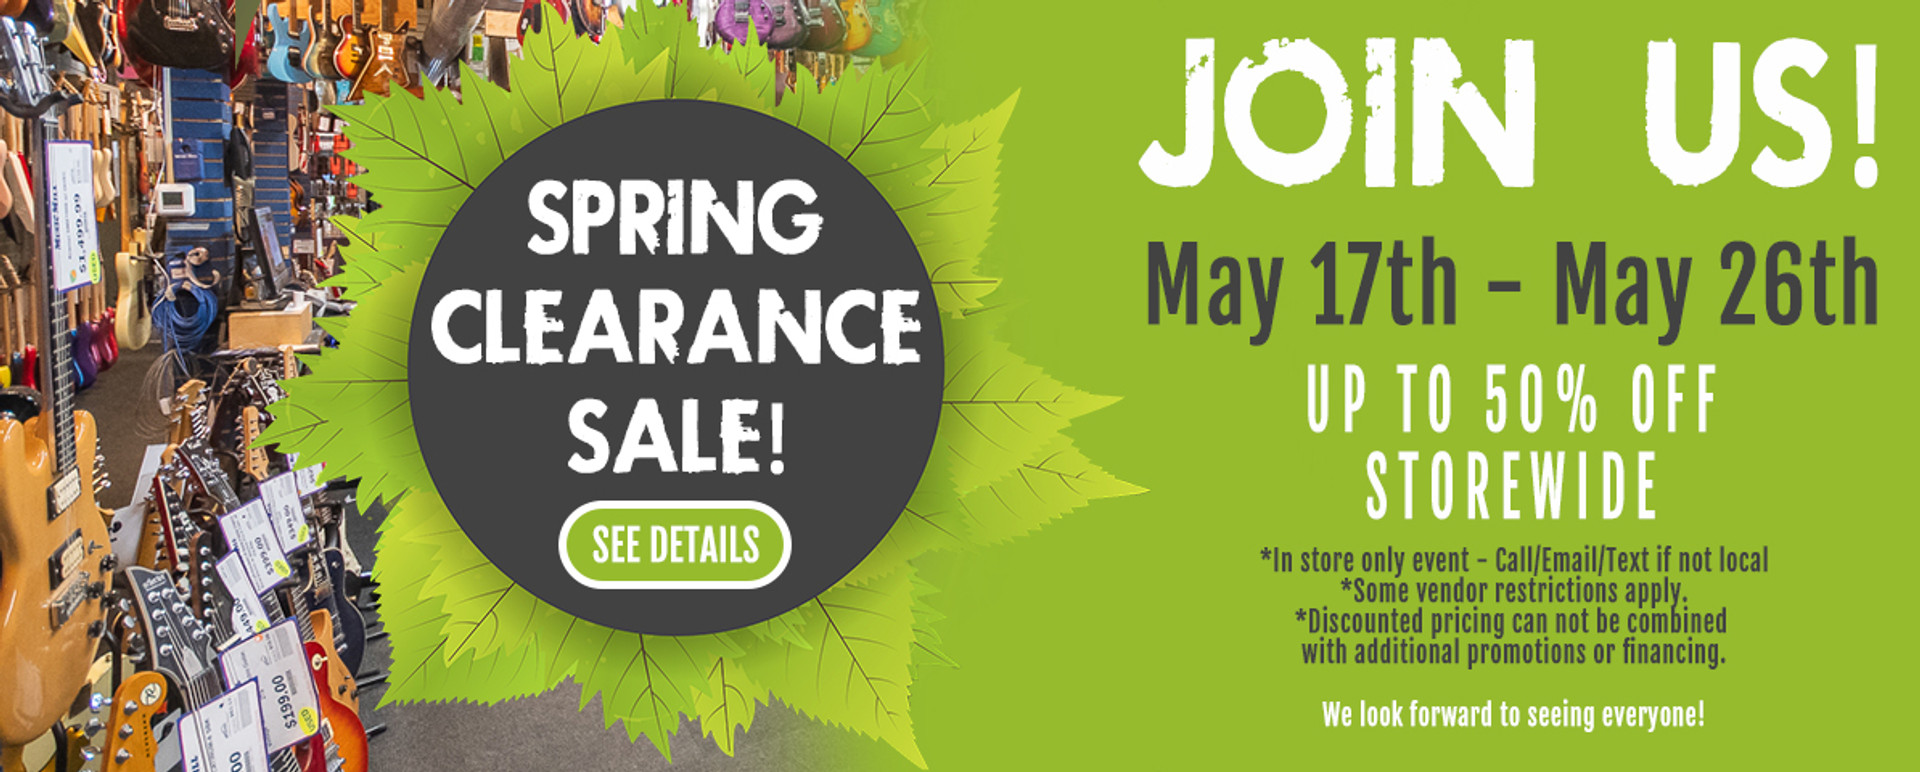 SPRING CLEARANCE SALE!